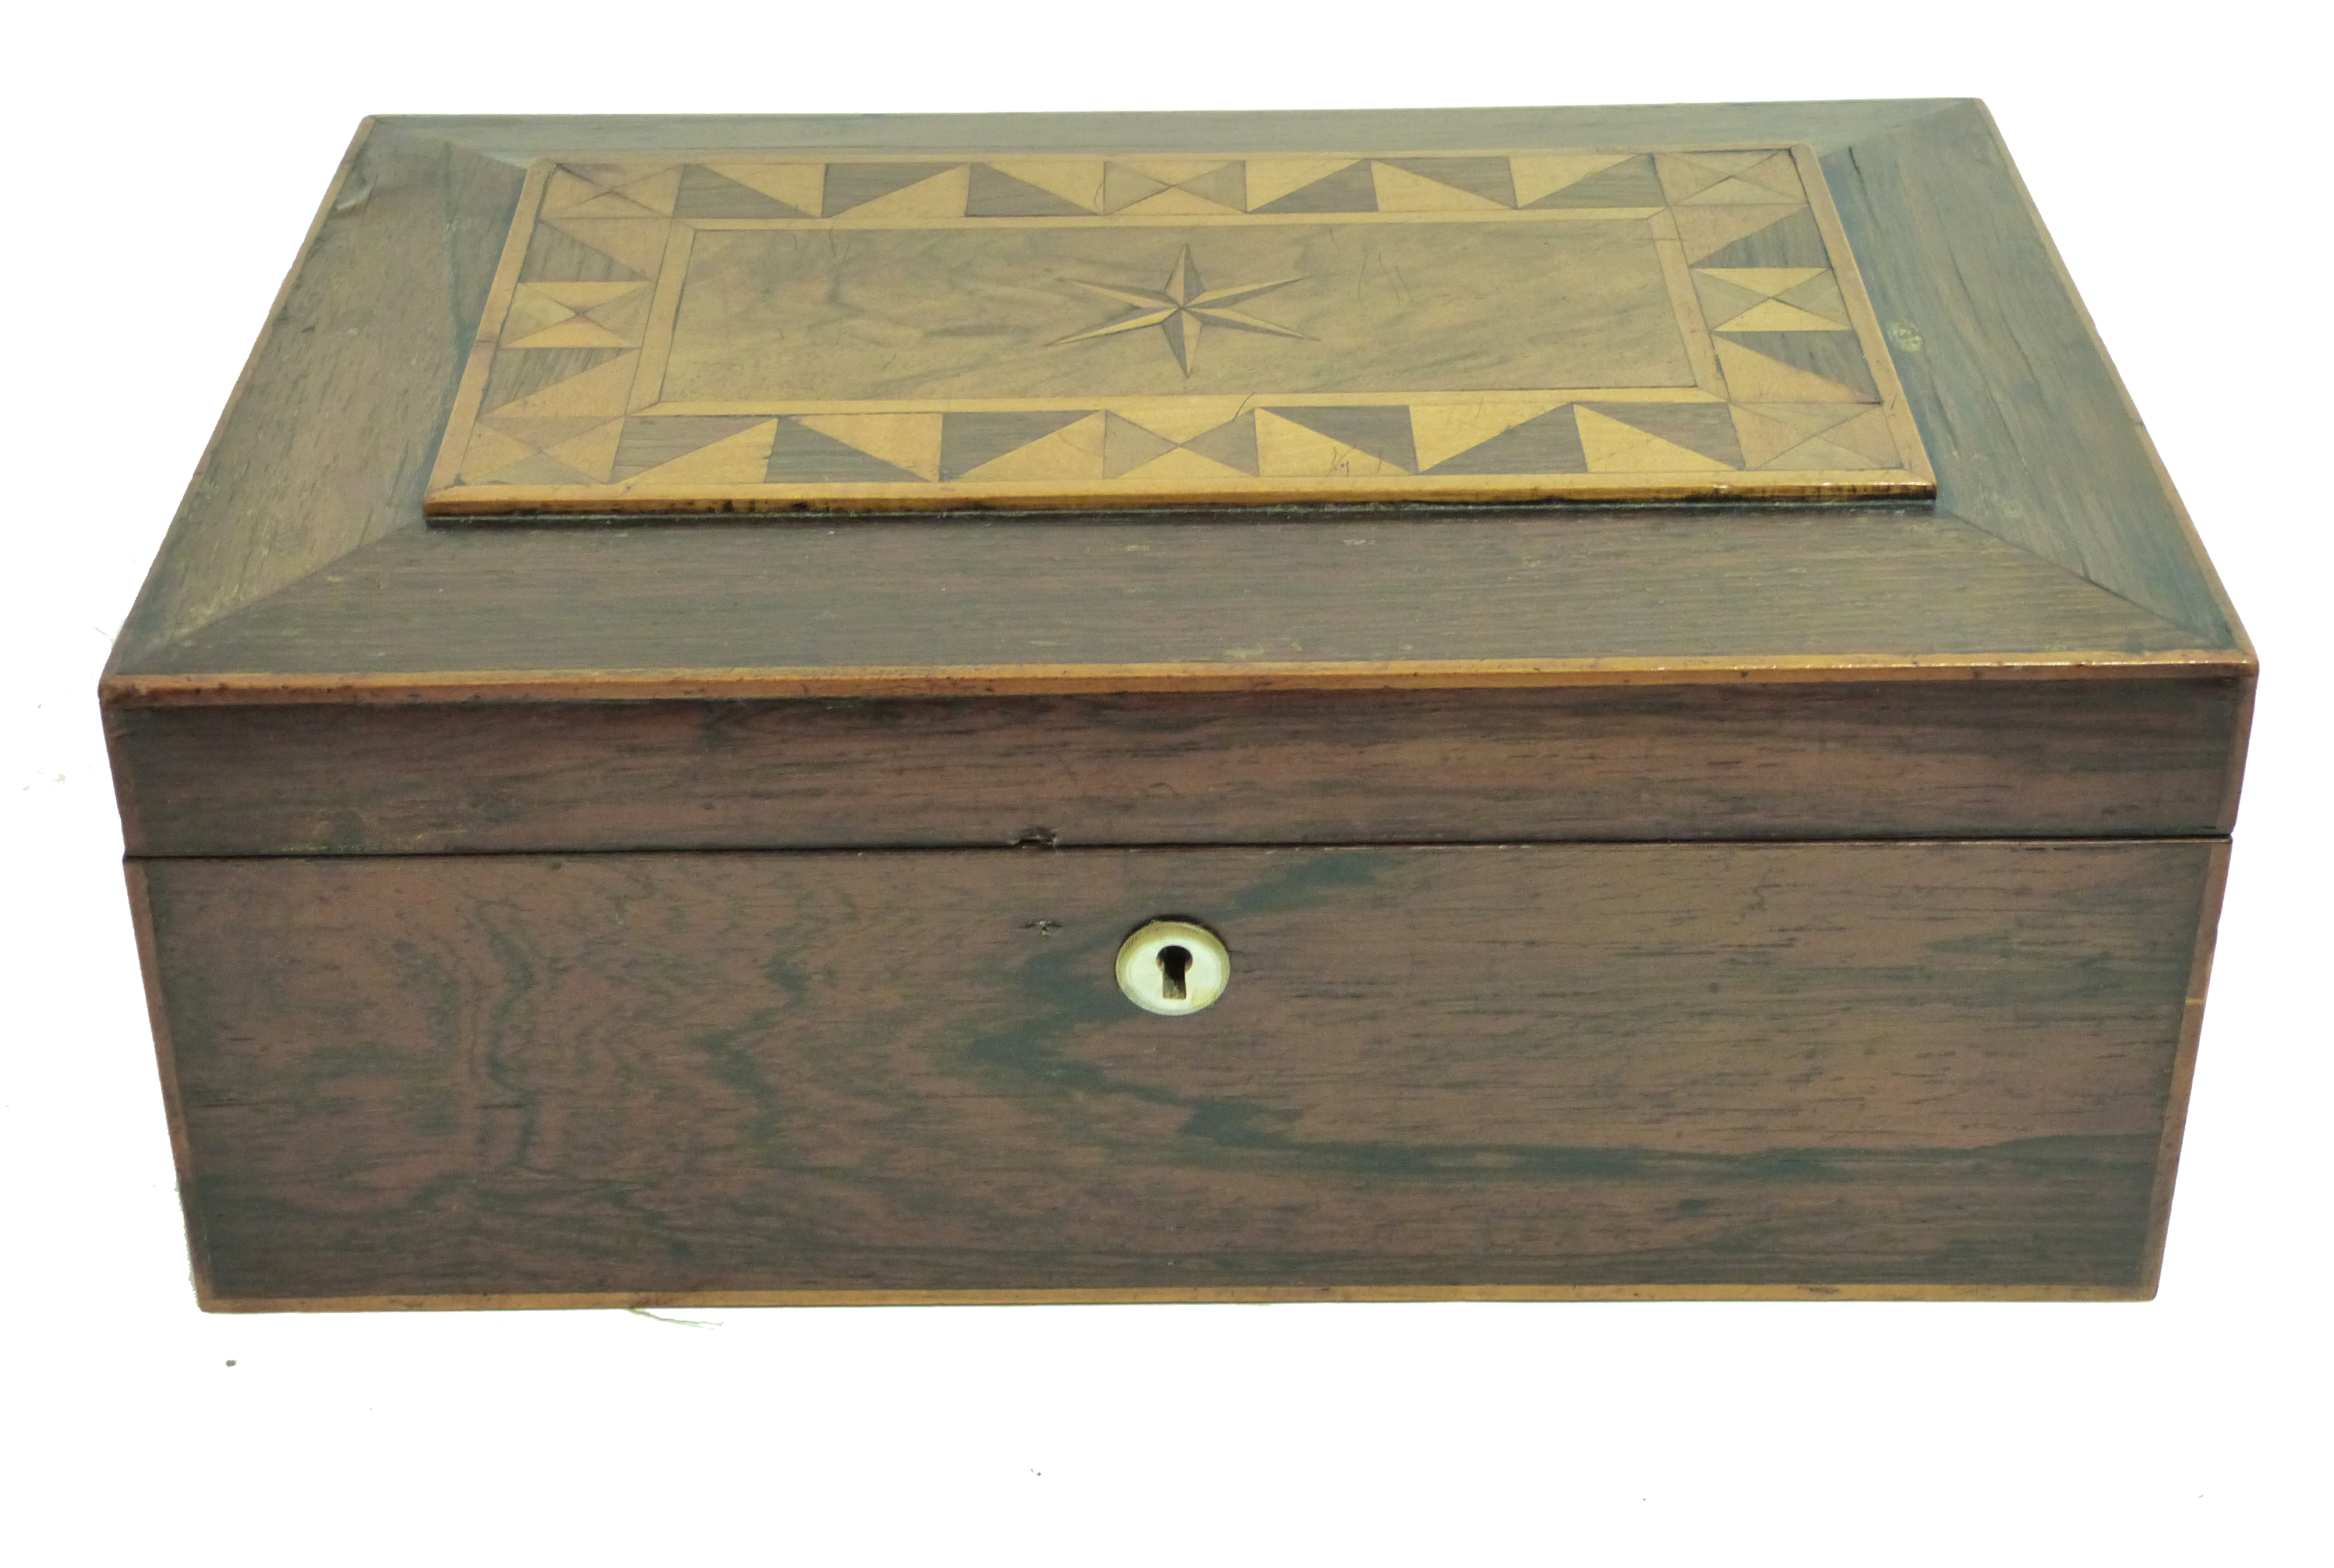 19th century ladies companion box with fitted and lined compartments with star and geometric inlay